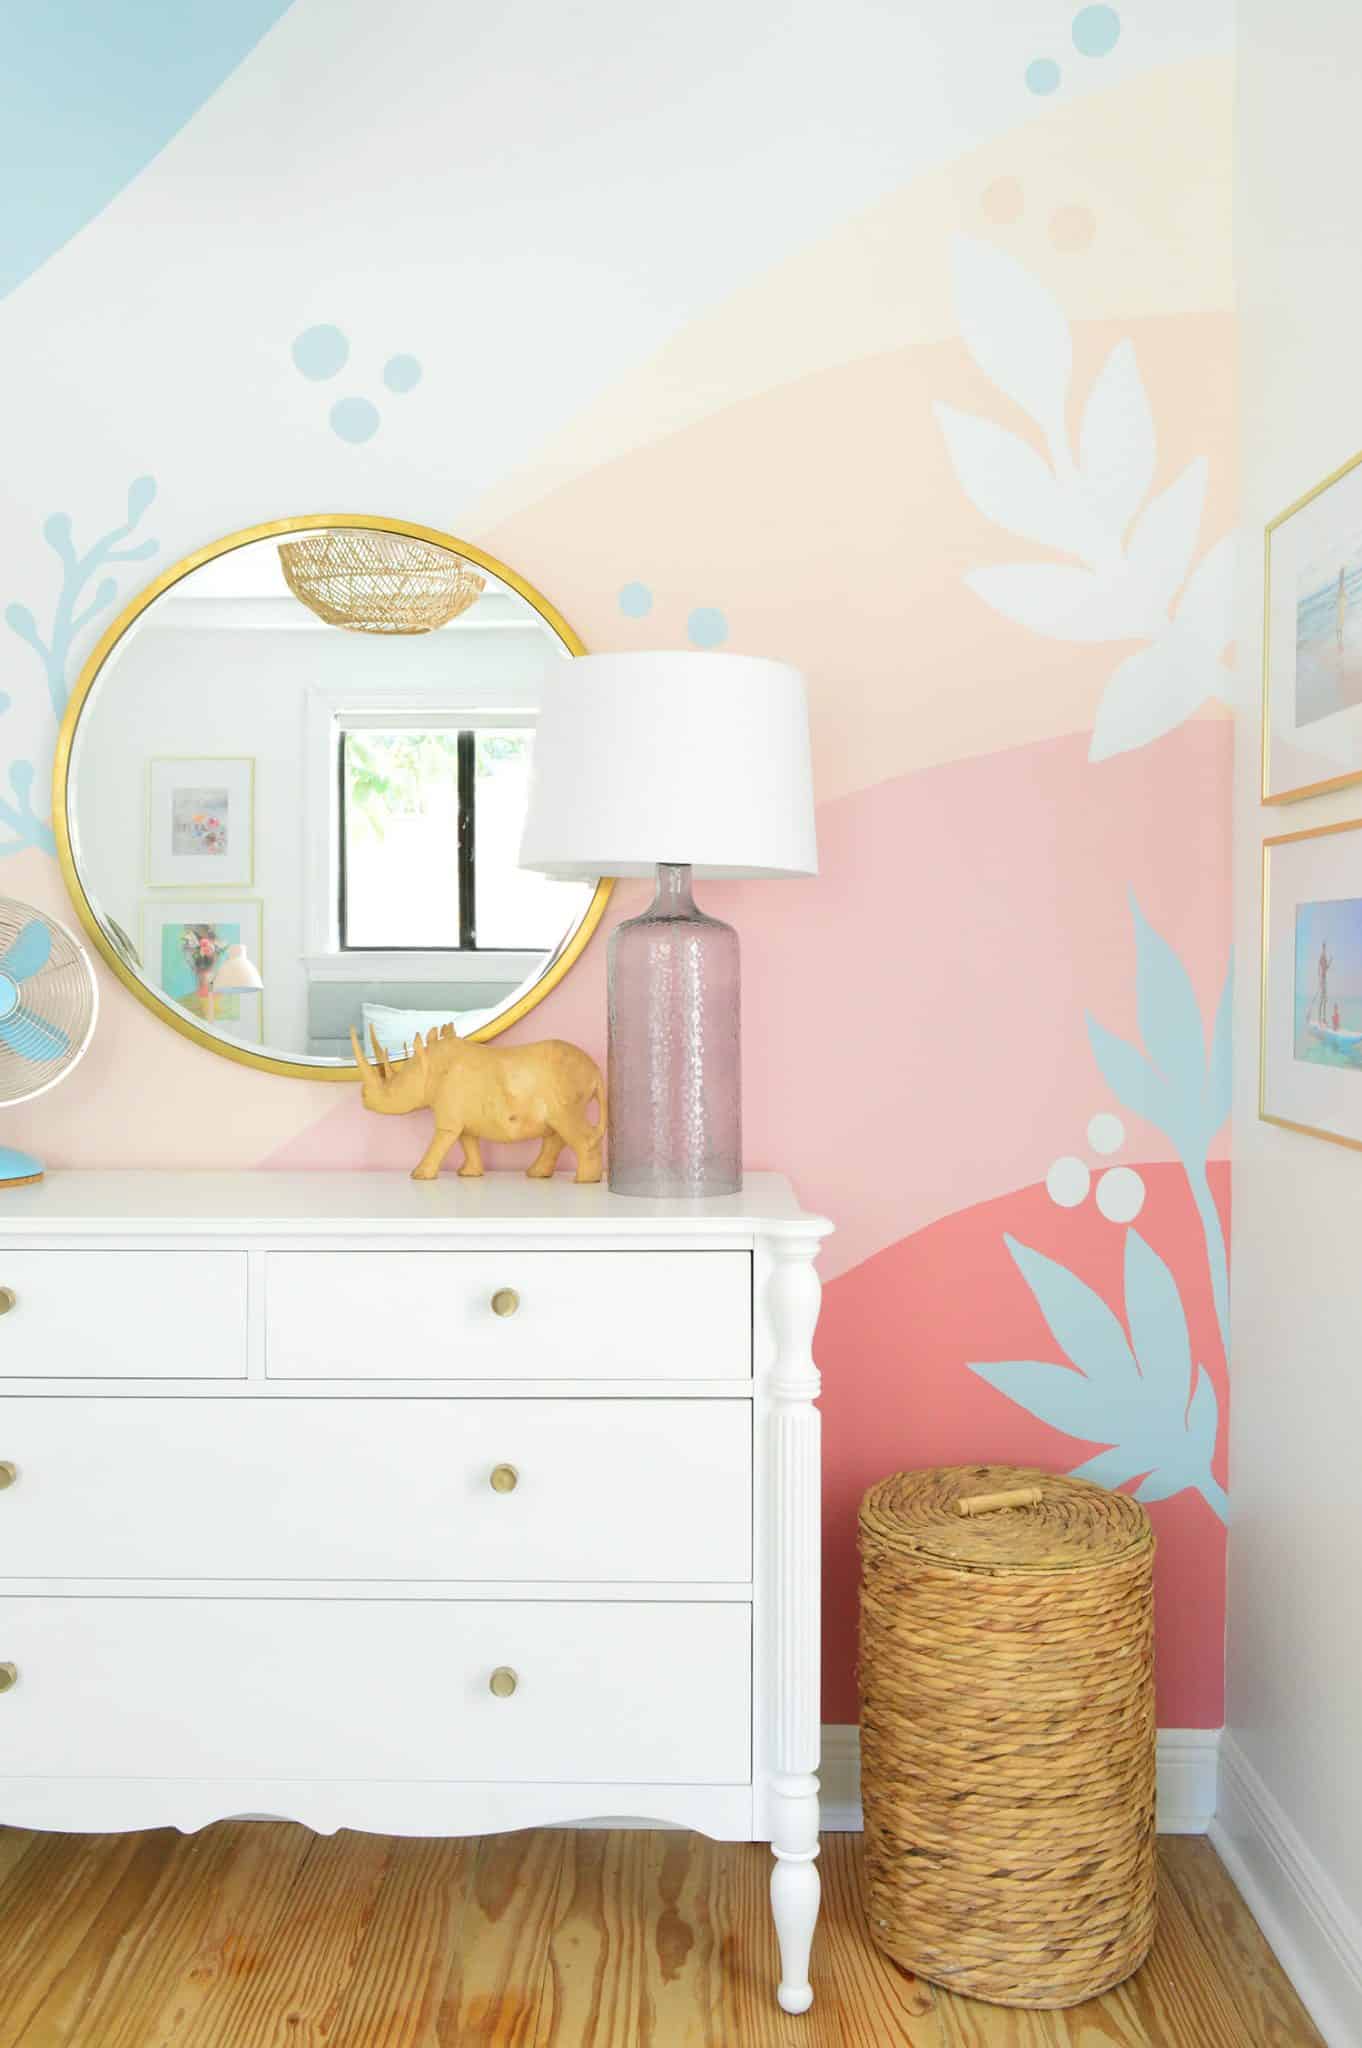 HOW TO PAINT A DIY WALL MURAL IN YOUR HOME for girls room paint ideas